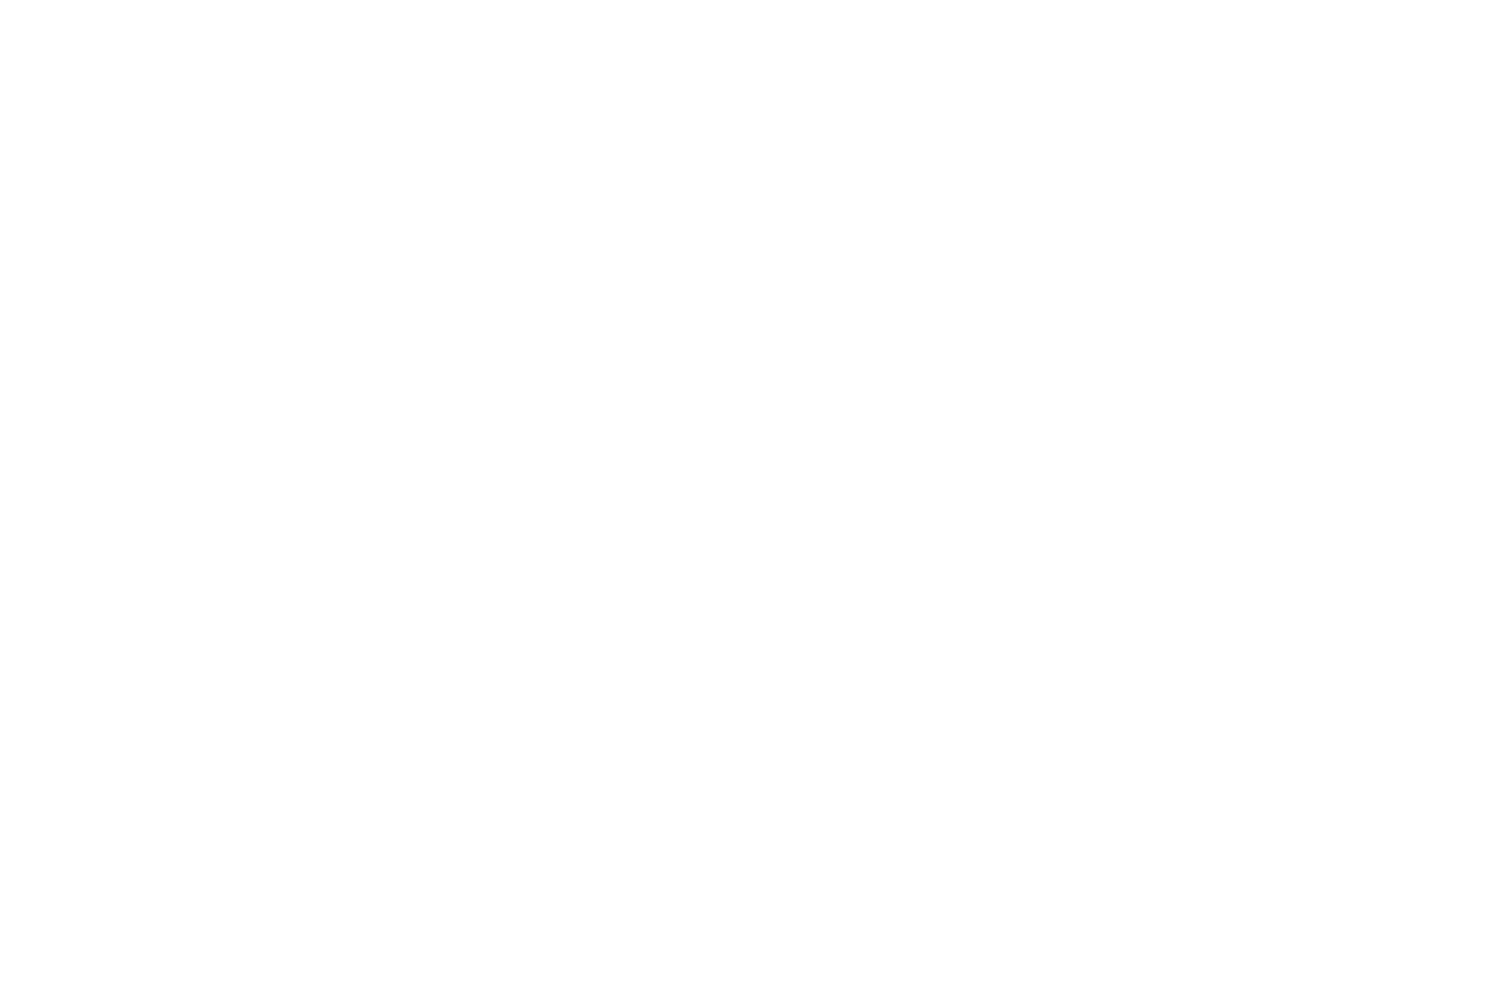 Photography Site